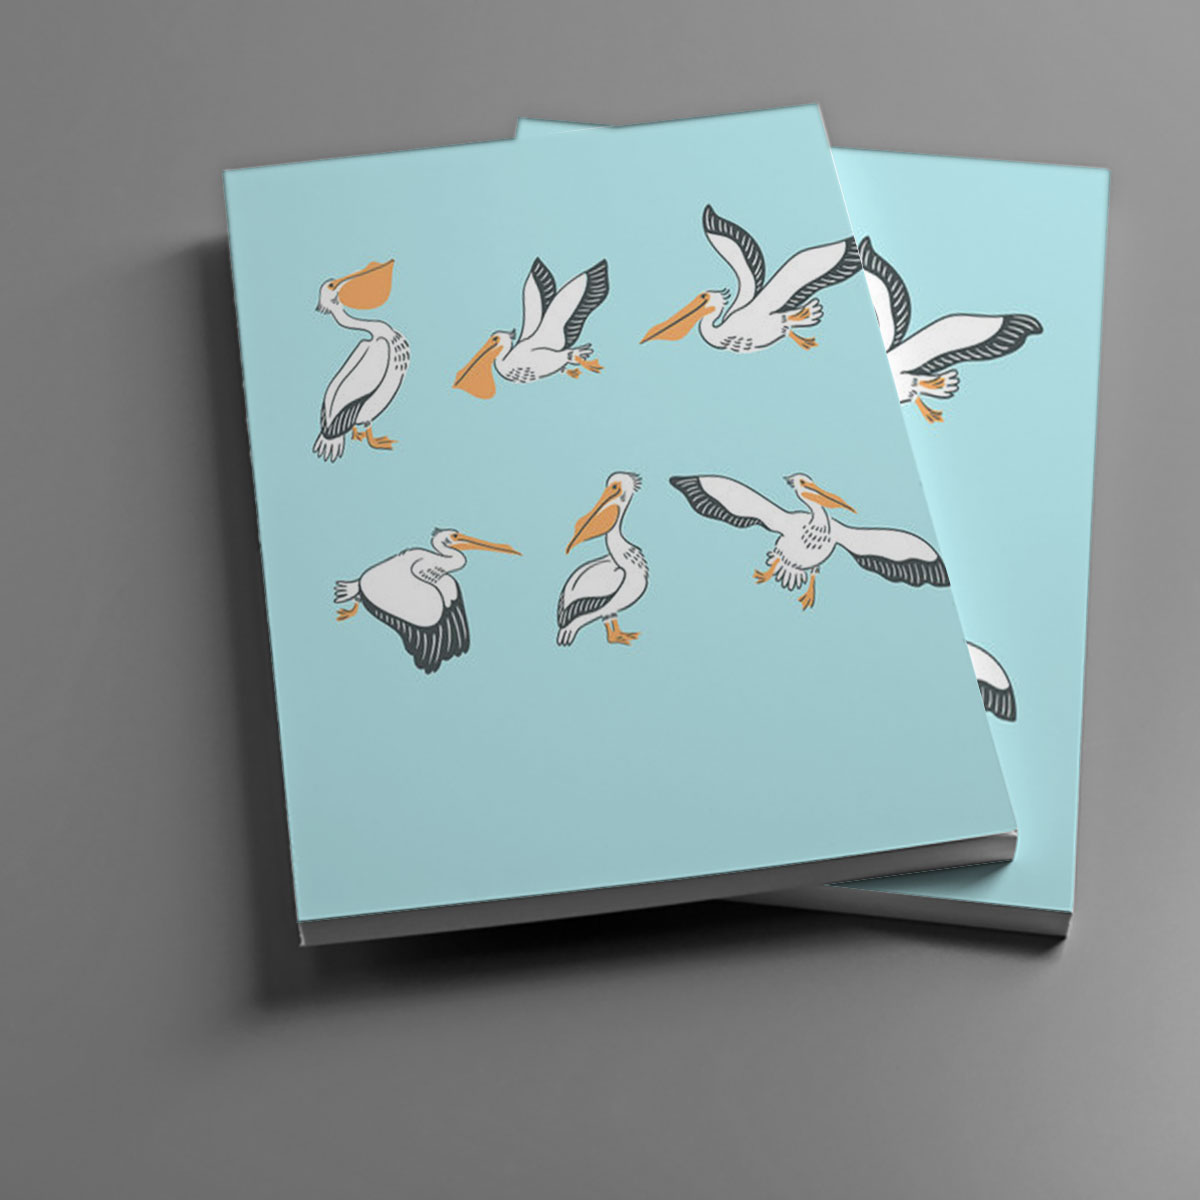 Positions Pelicans Coon Notebook